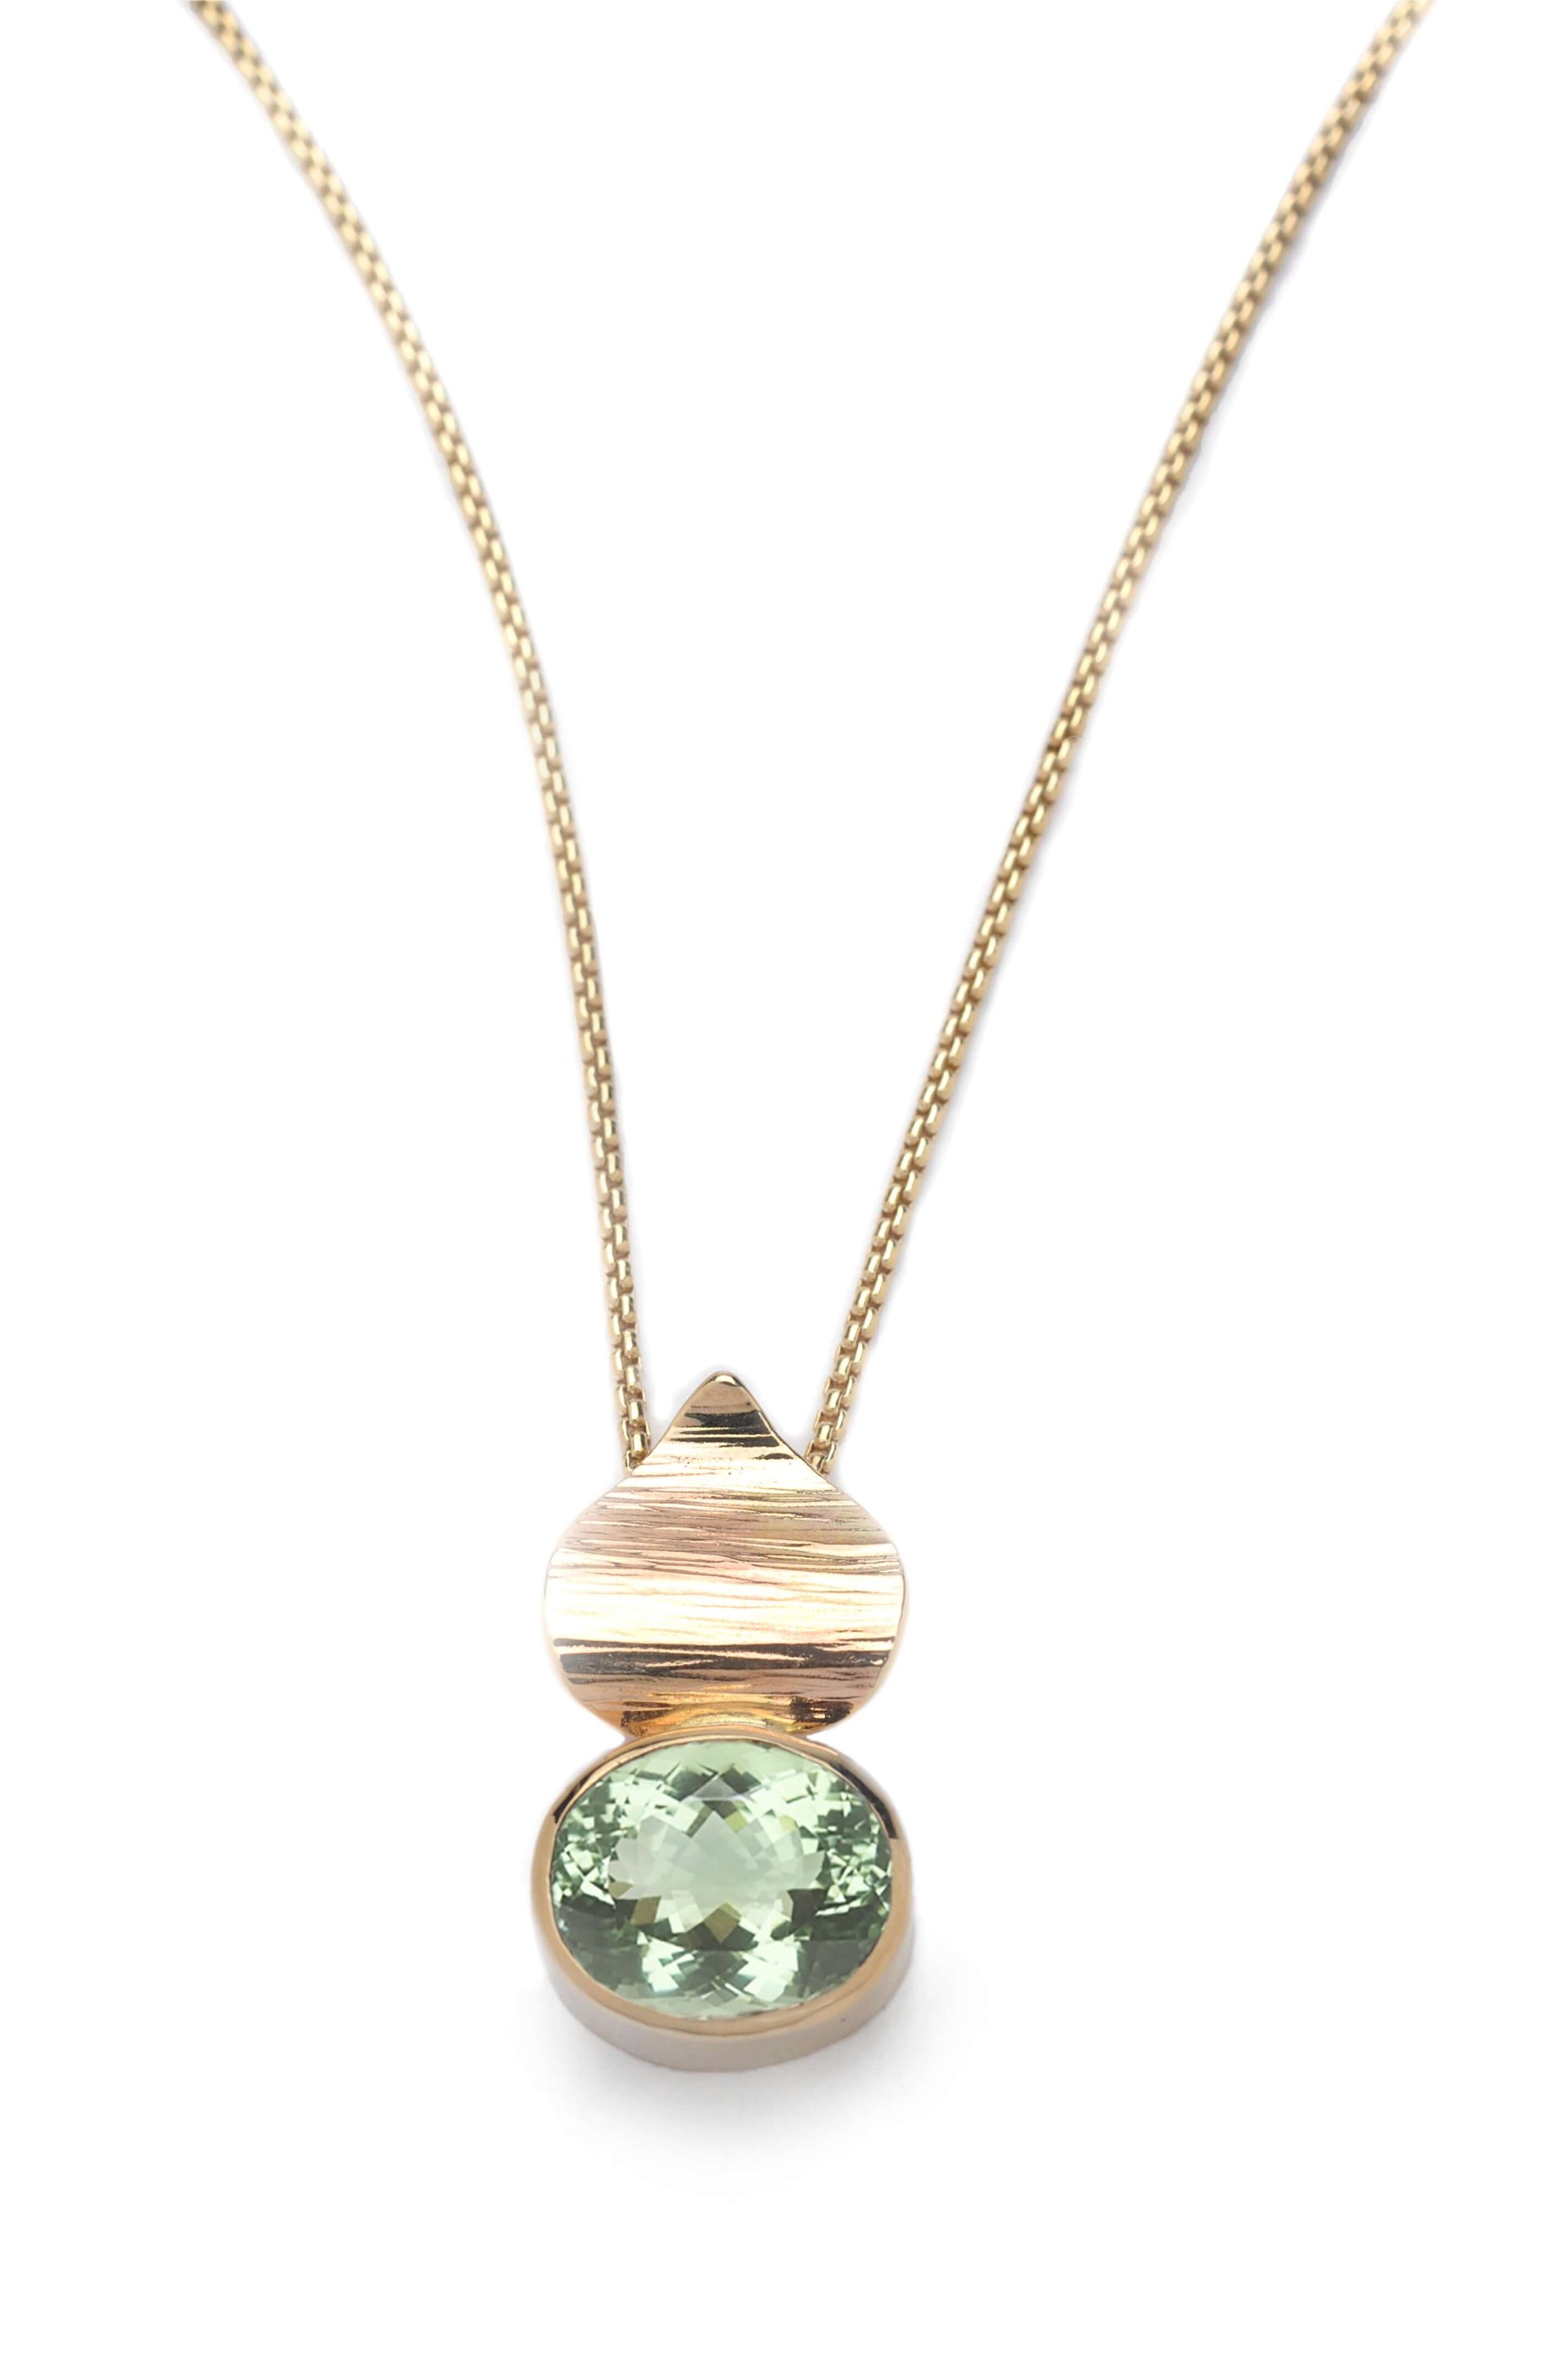 A handmade prasiolite pendant gold with a 14k gold chain